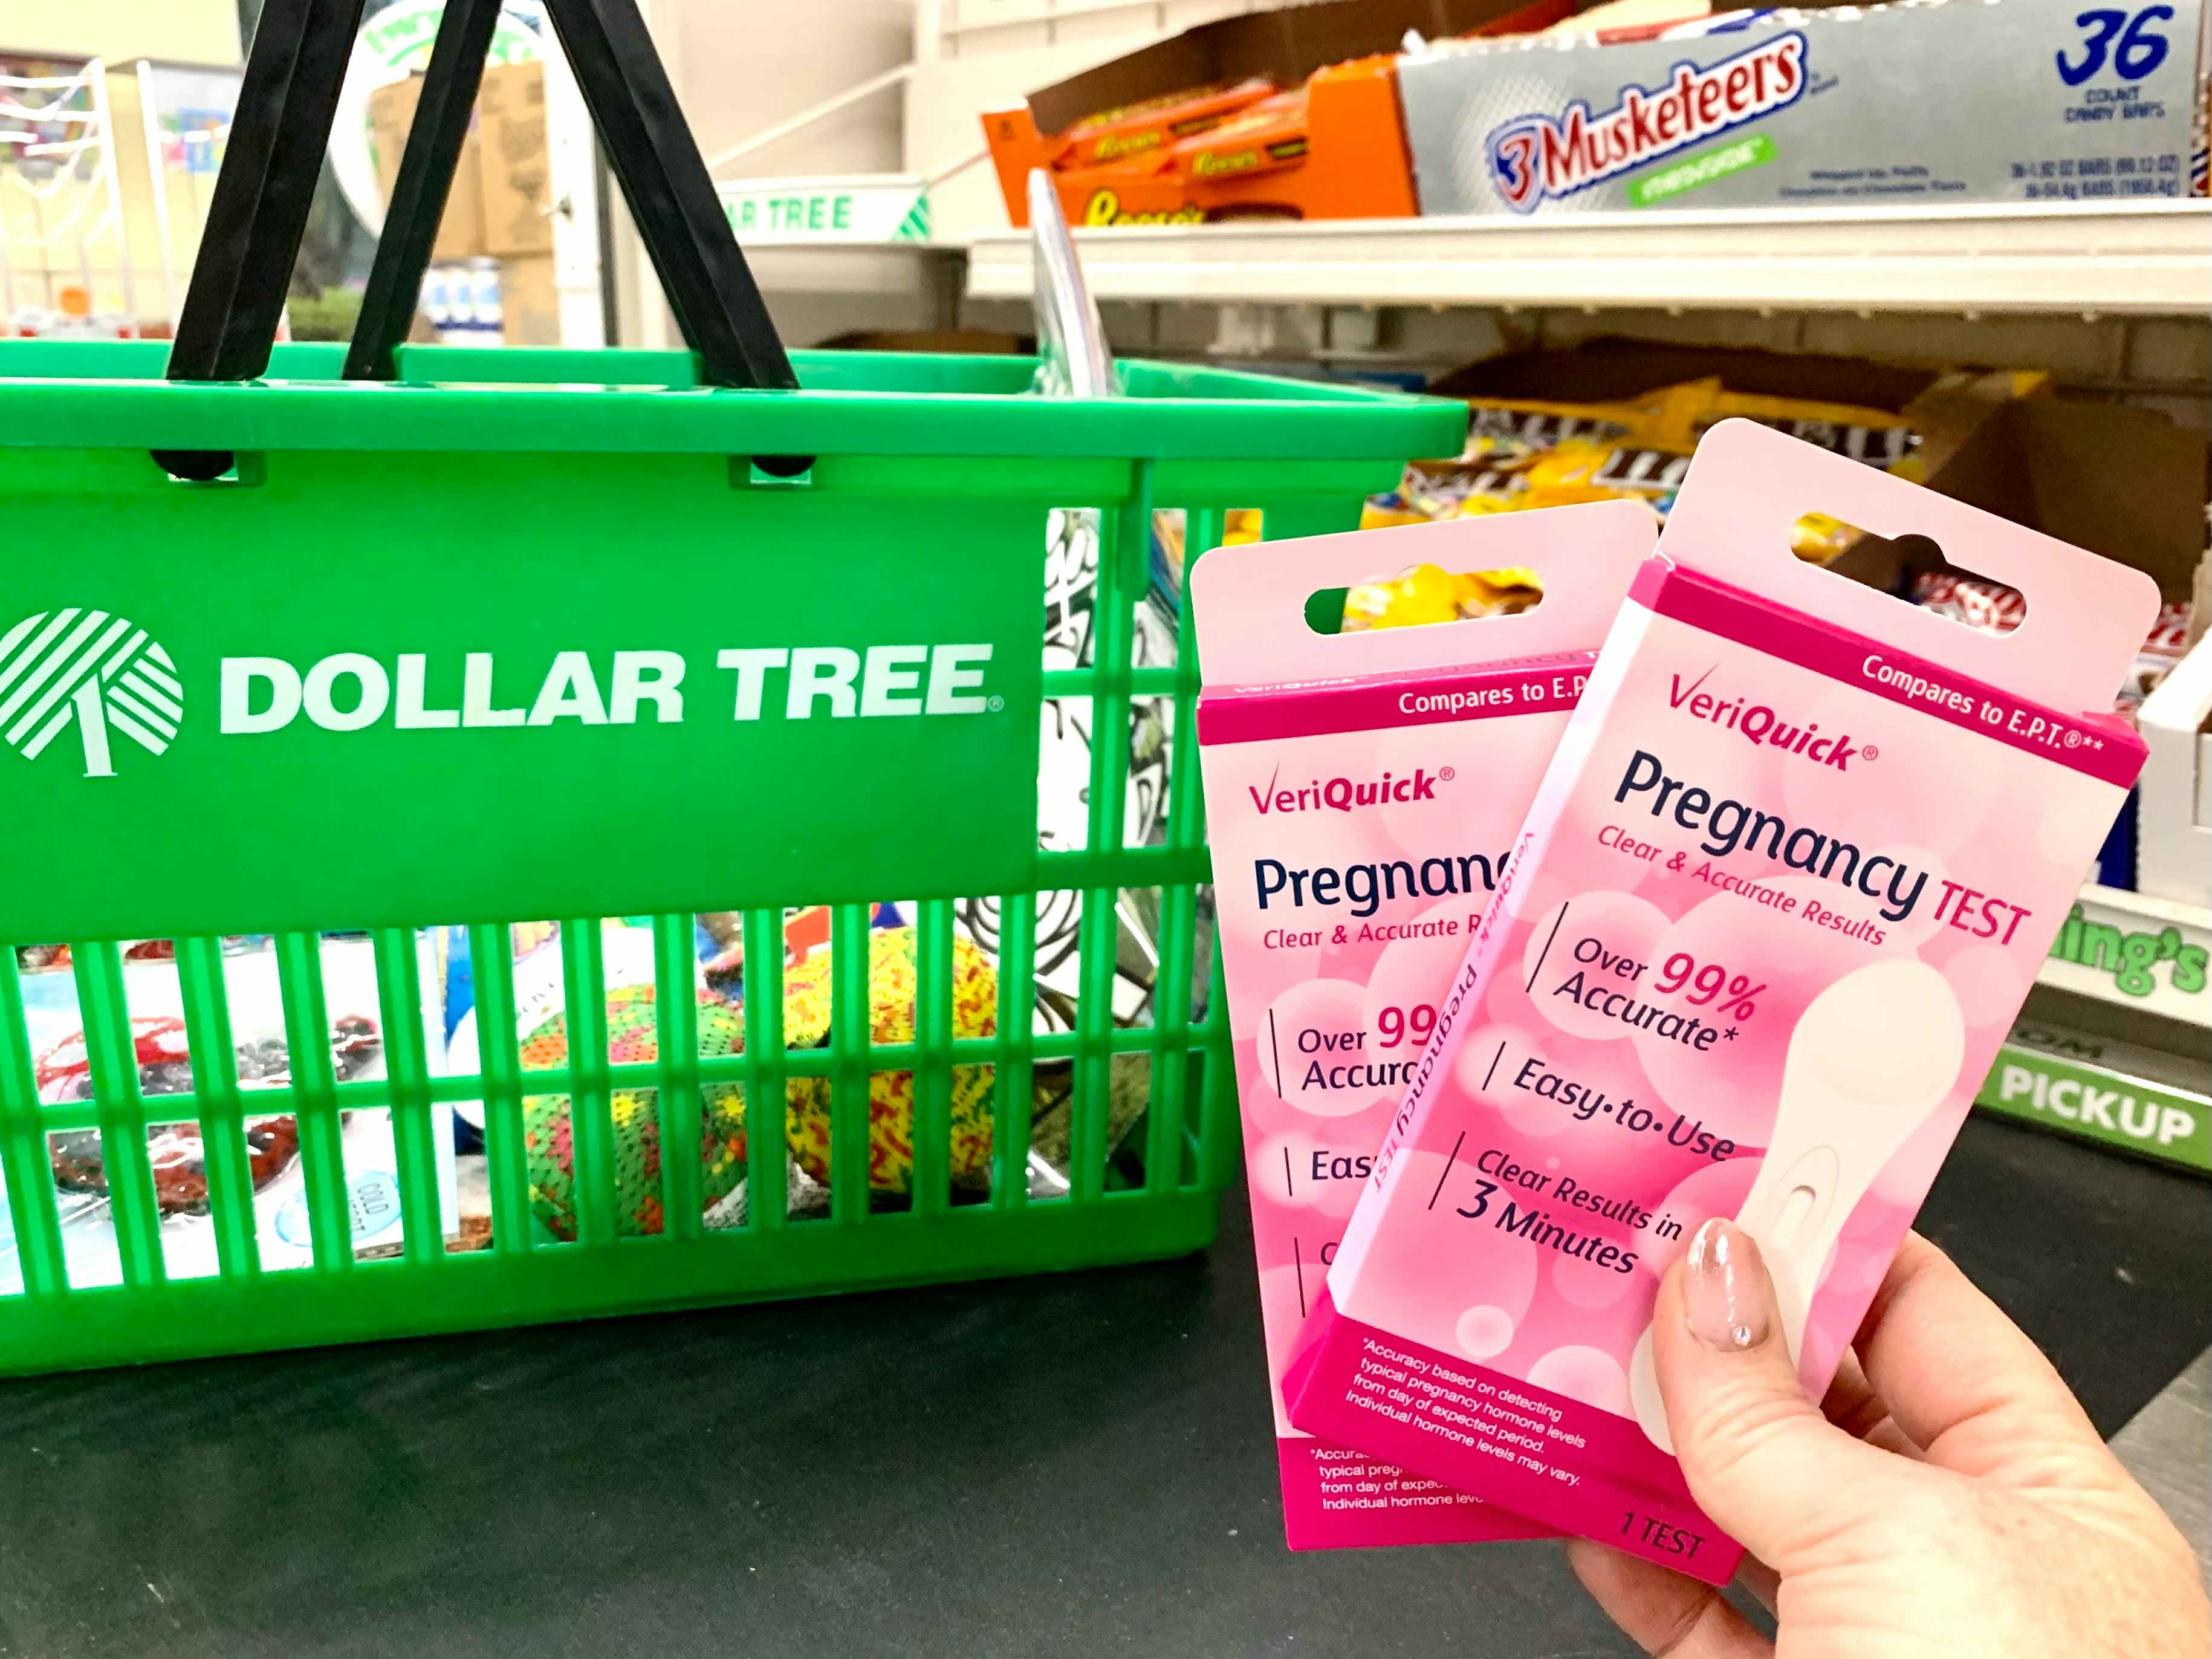 Dollar Tree Plus - What to Know Before You Go!